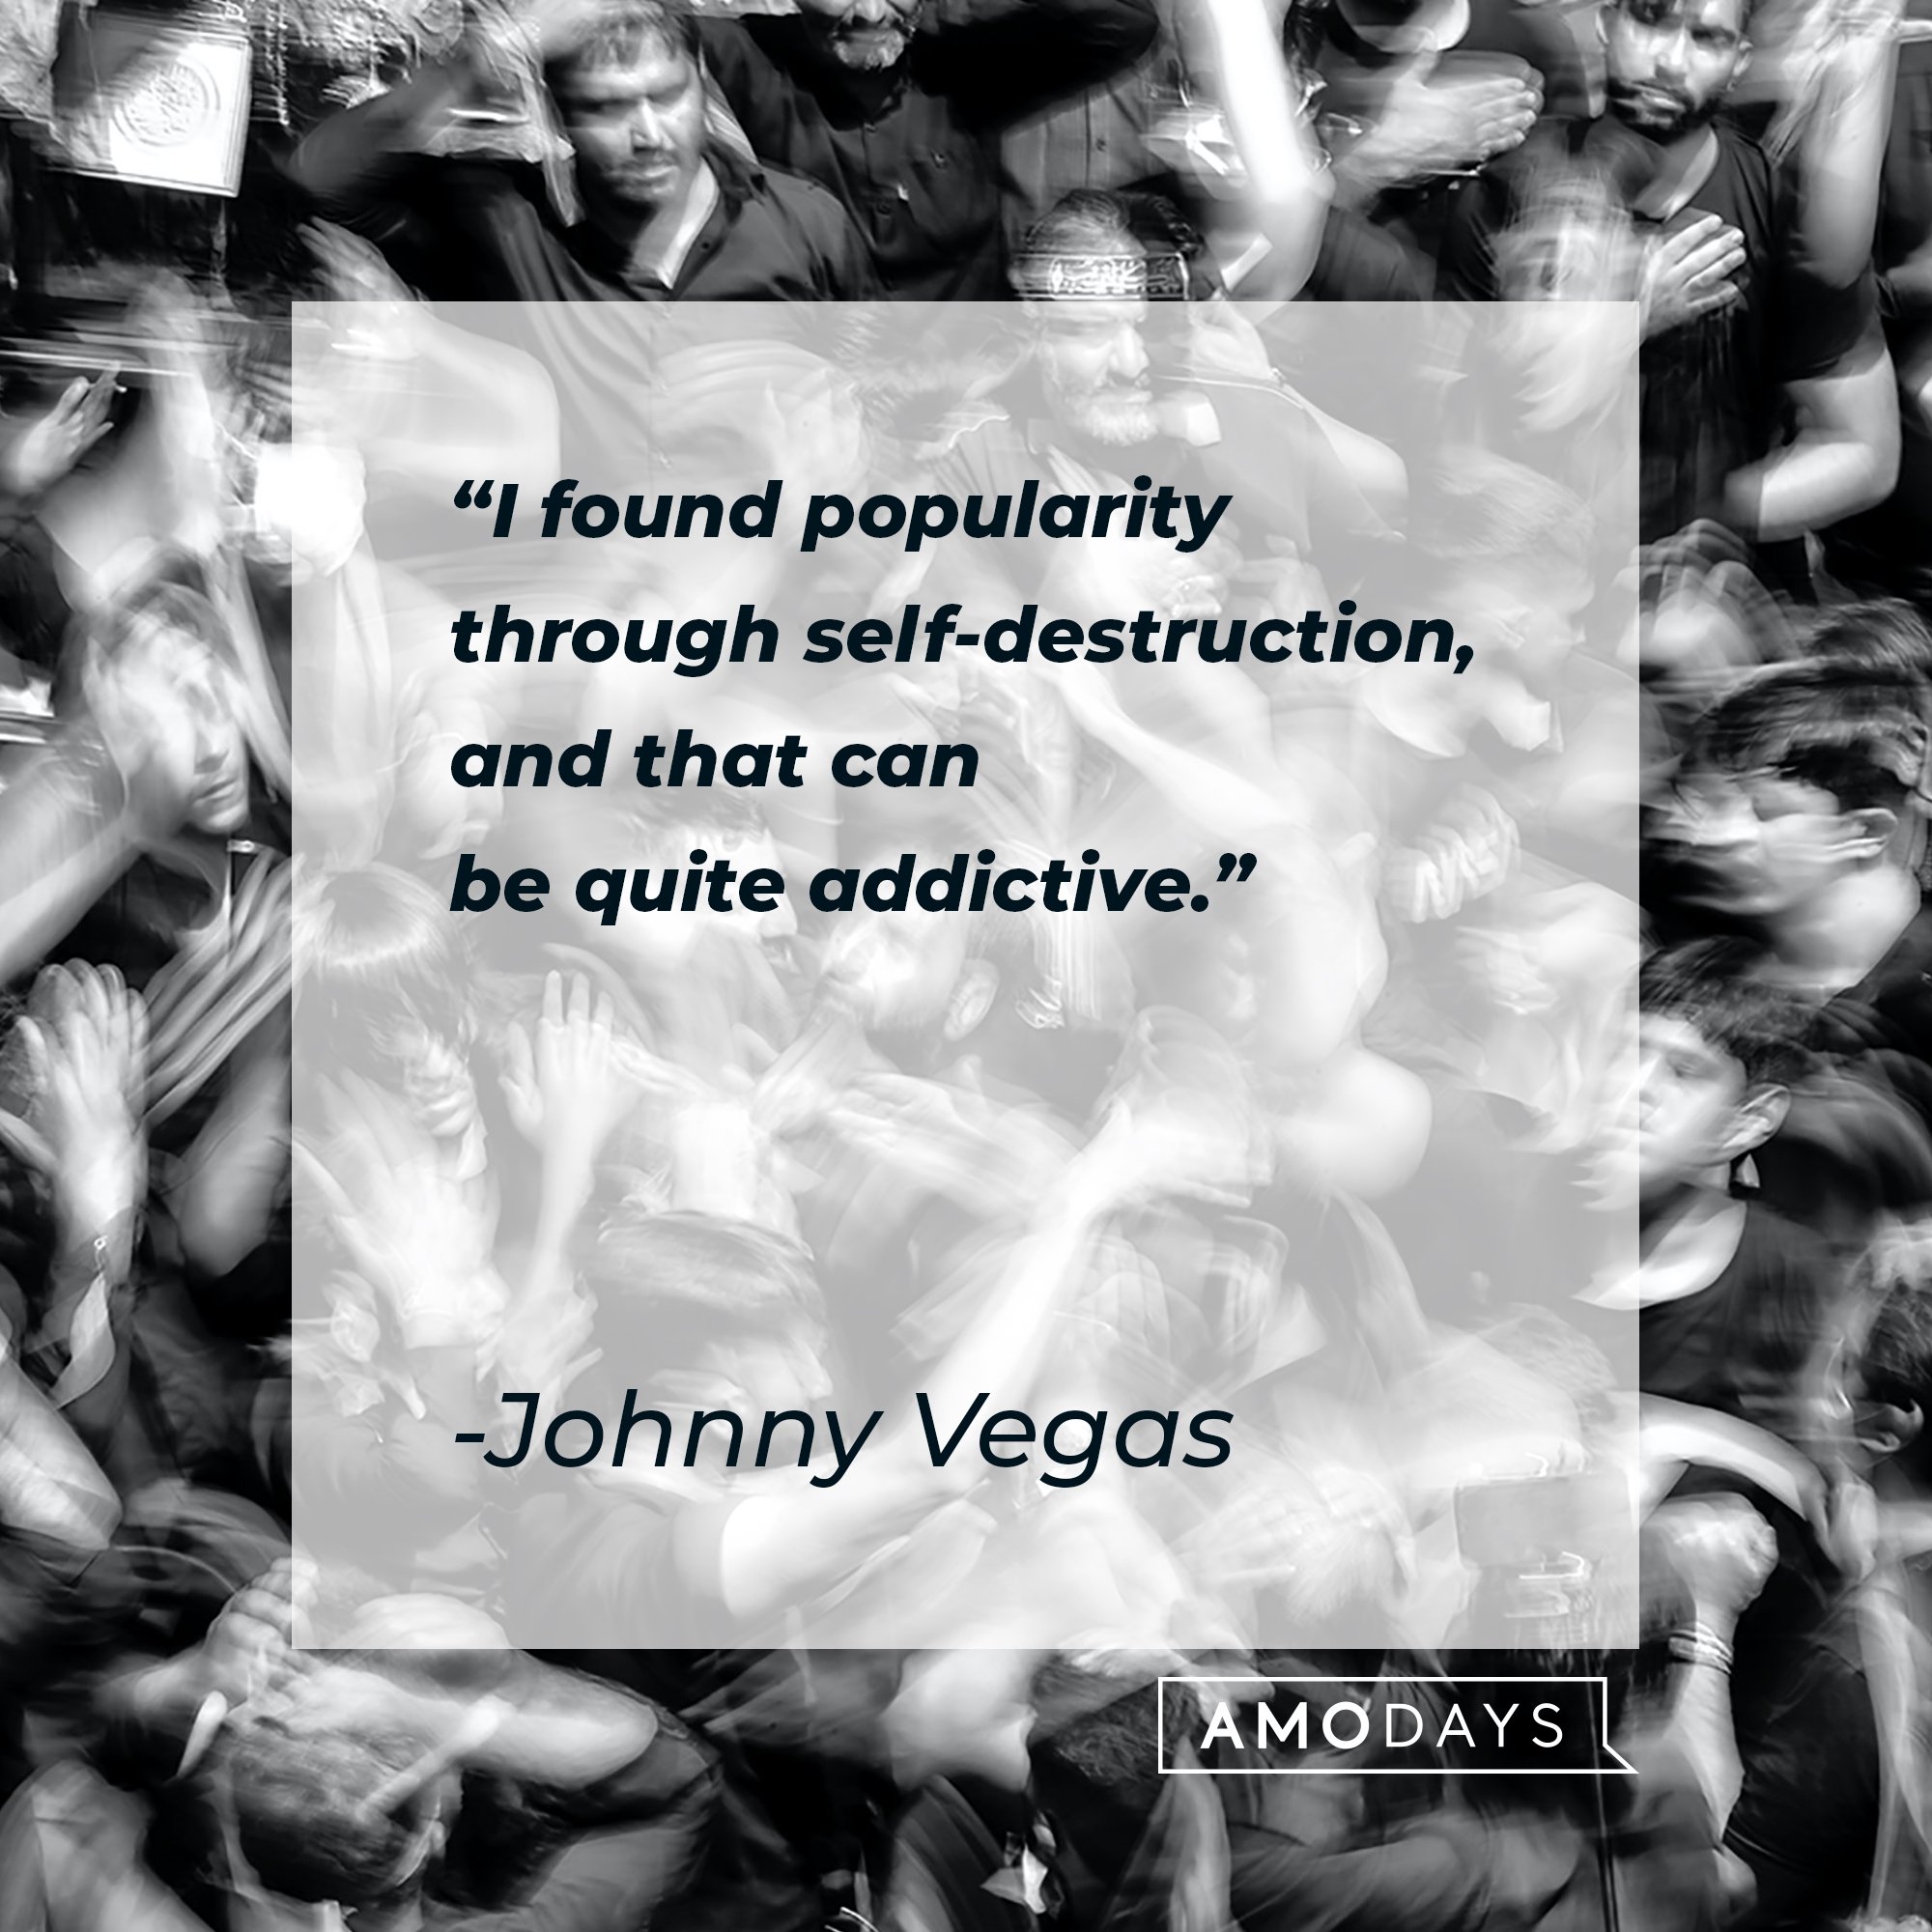 Johnny Vegas’s quote: "I found popularity through self-destruction, and that can be quite addictive.” | Image: AmoDays